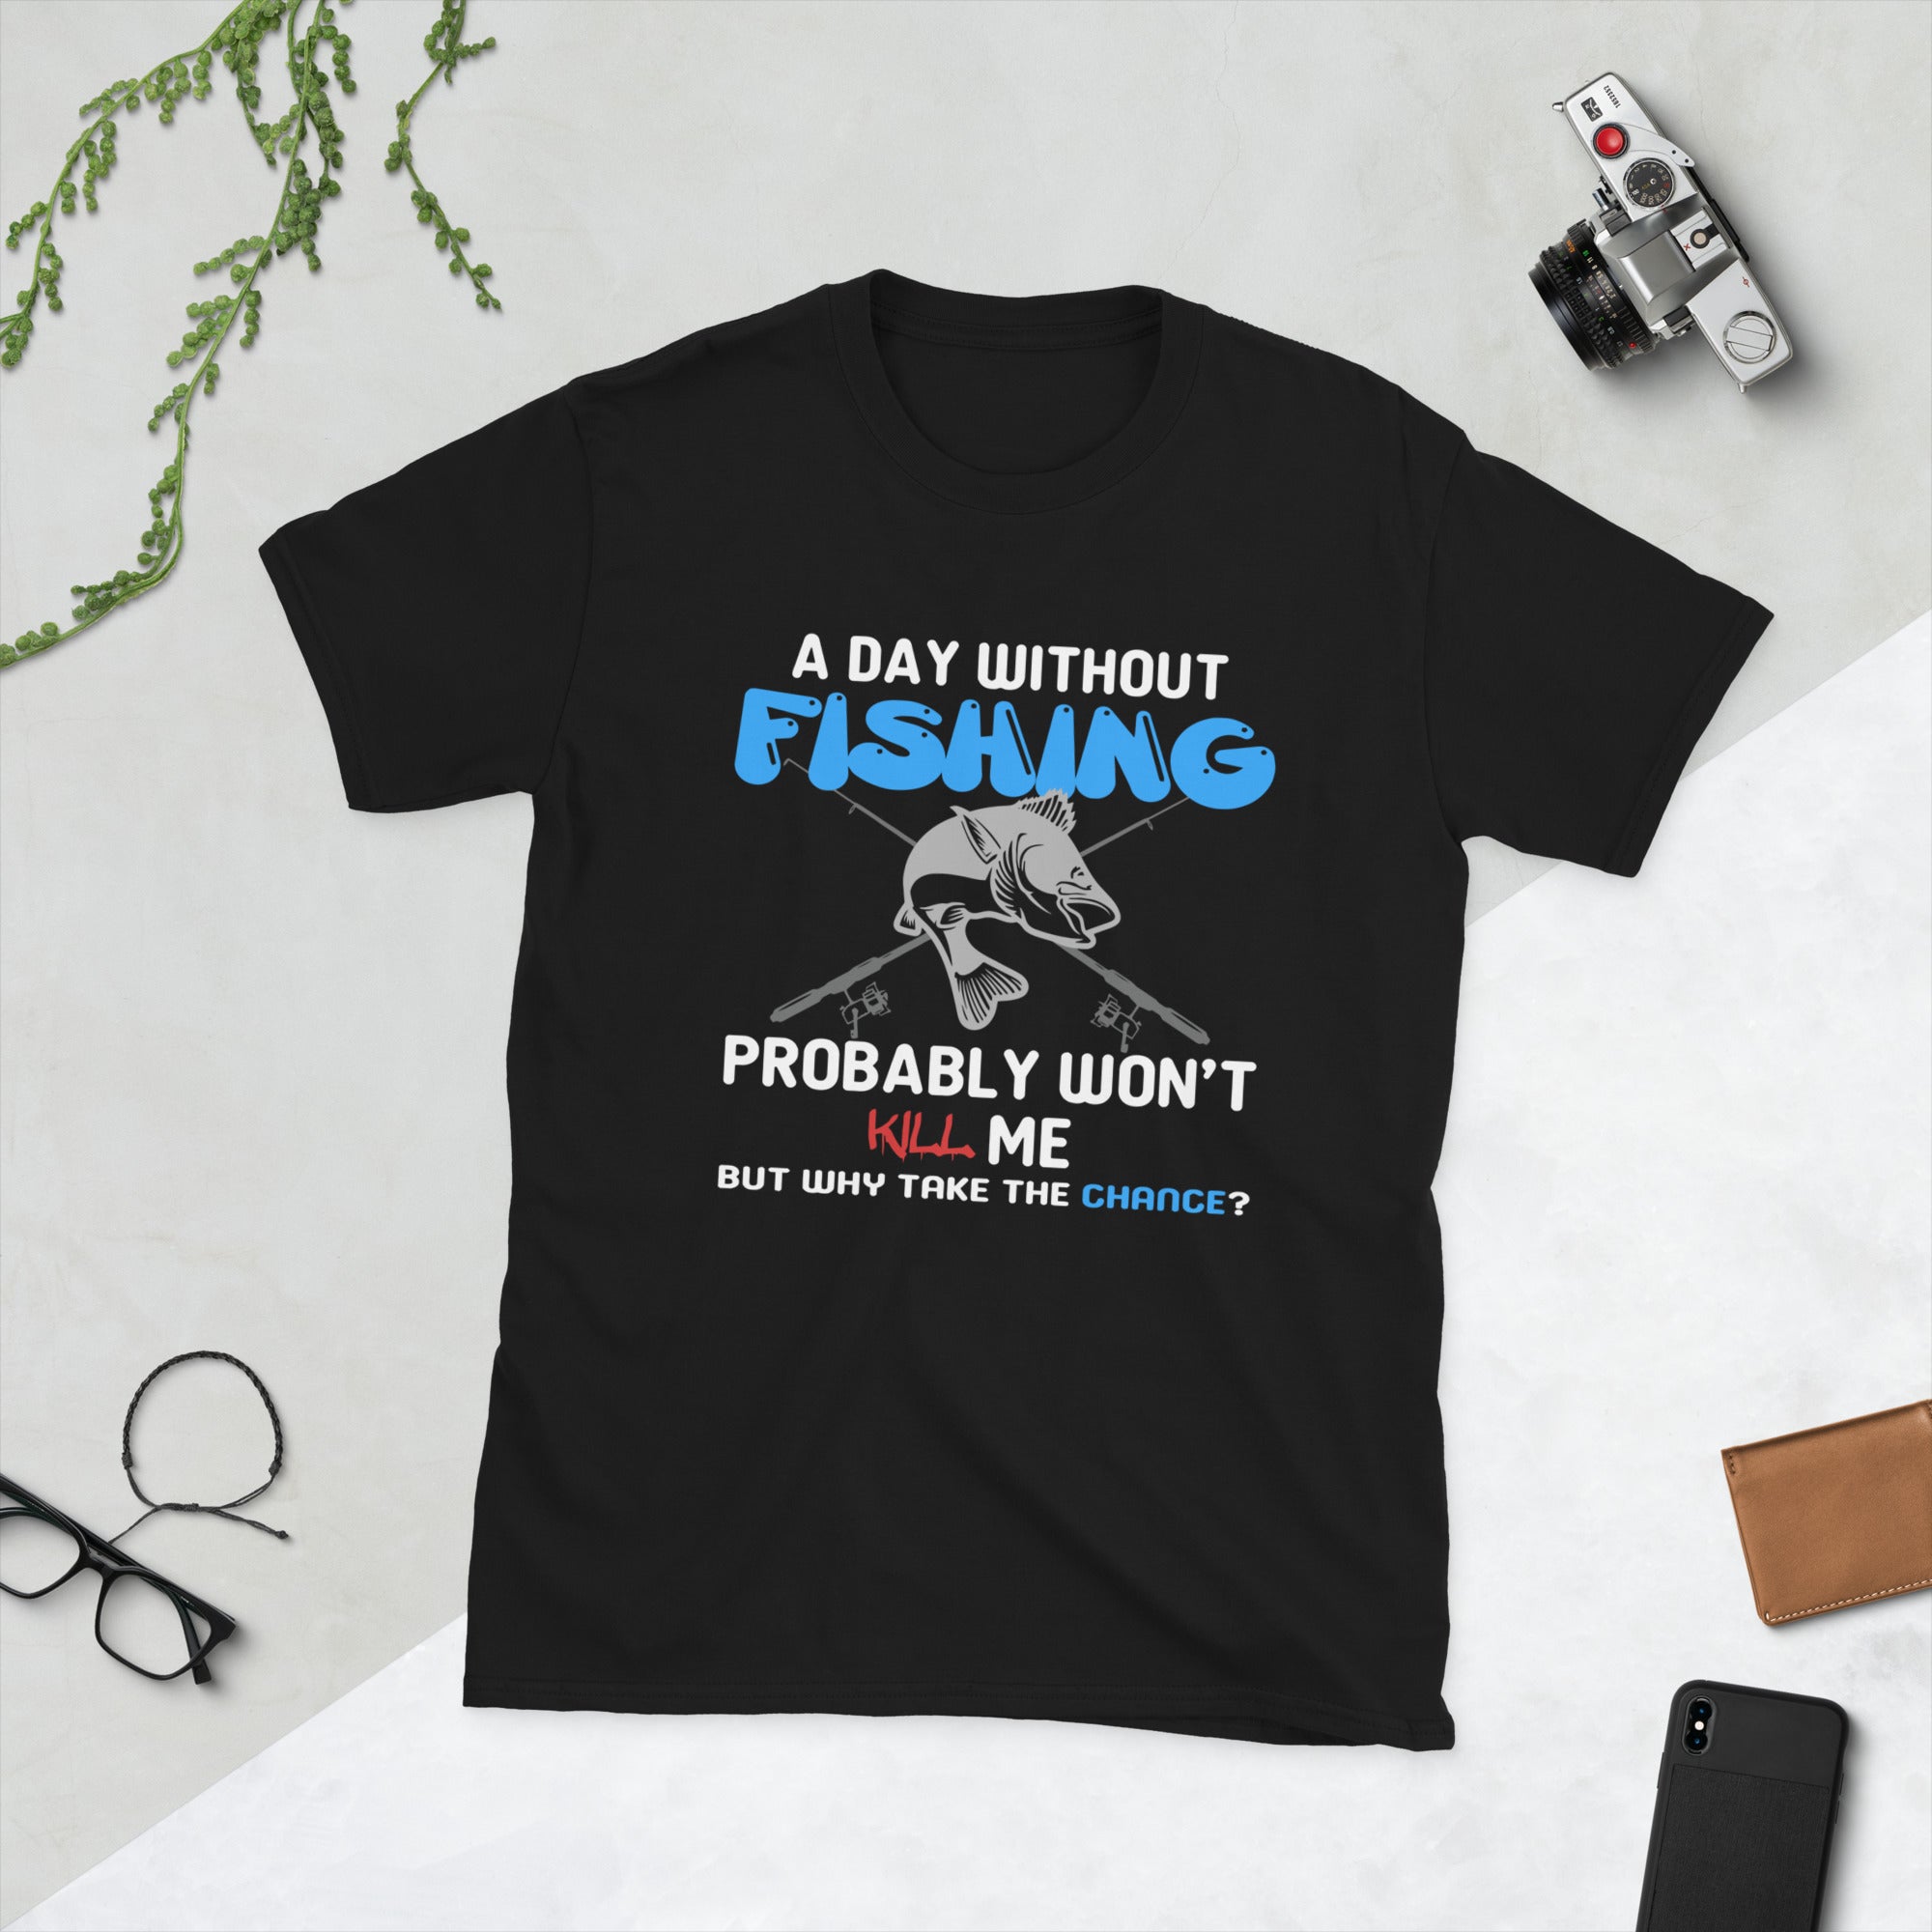 Short-Sleeve Unisex T-Shirt A DAY WITHOUT FISHING